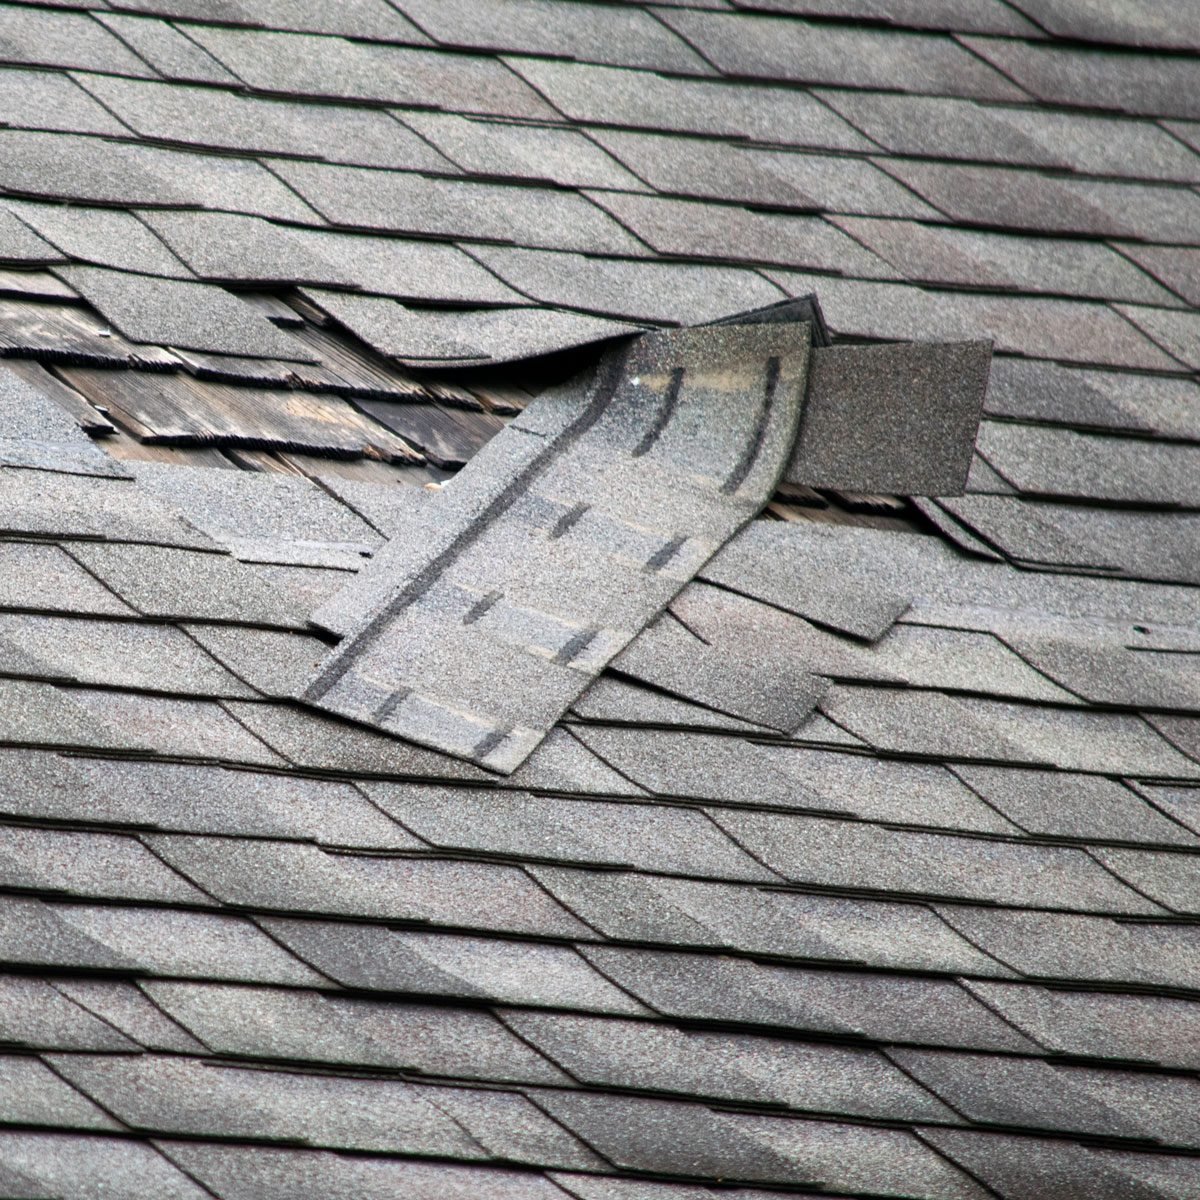 How To Replace Damaged Shingles